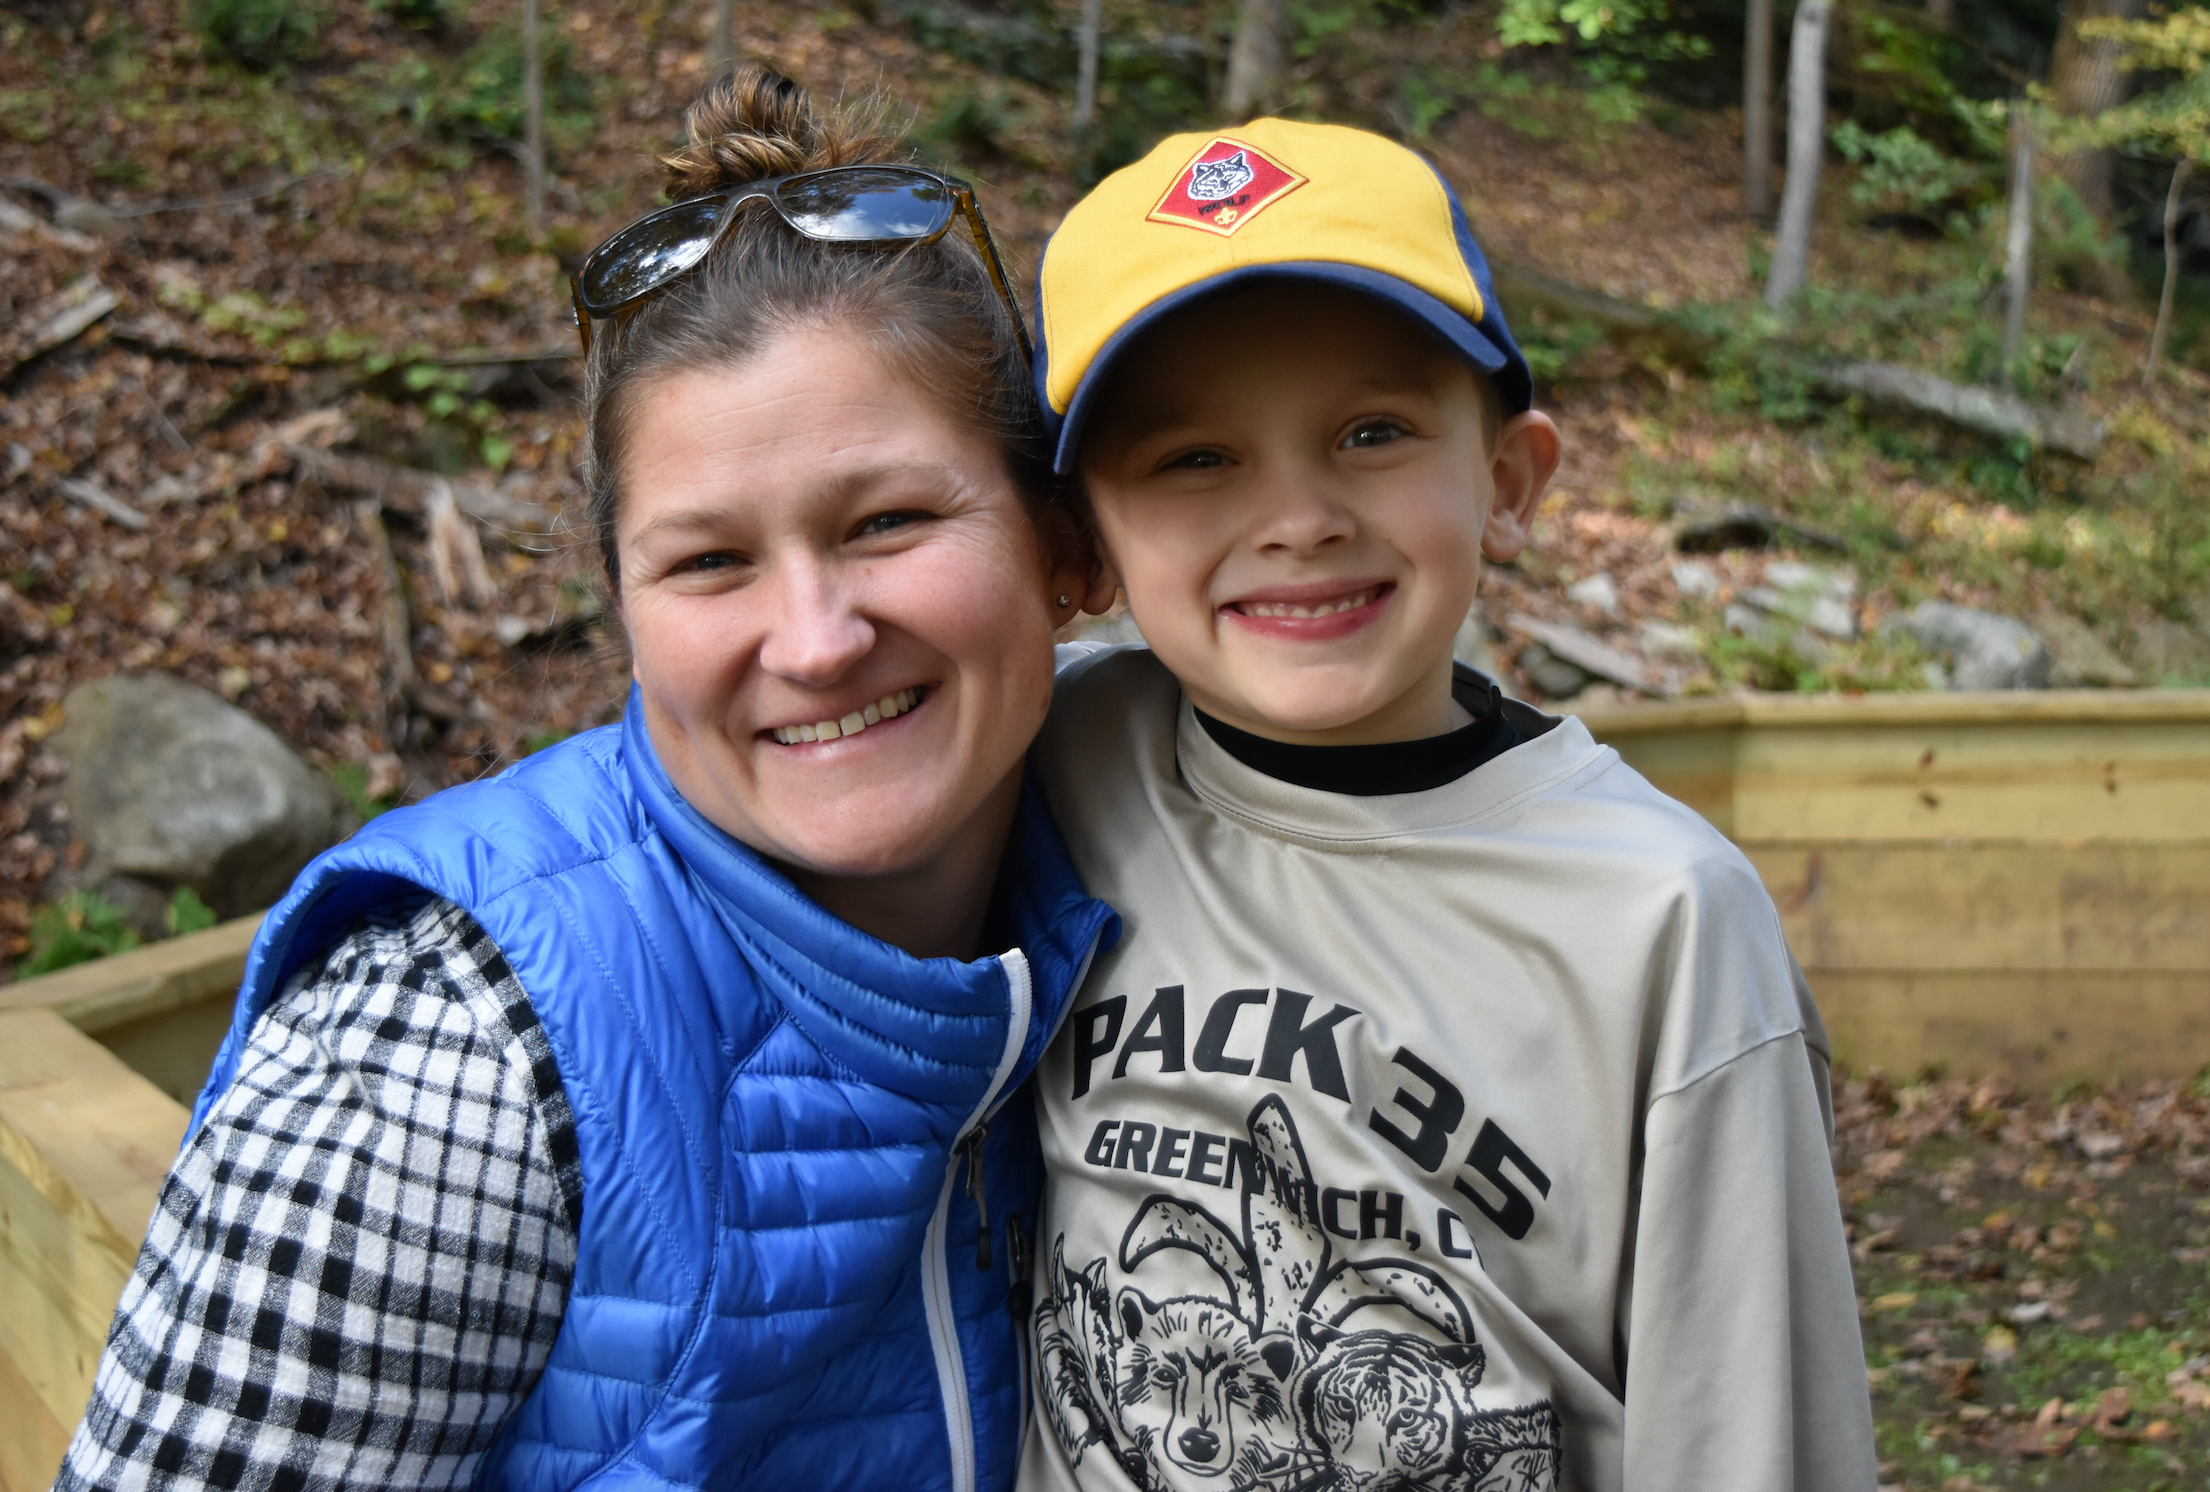 Dawn Wistrand with son Craig at Greenwich Scouting's Fall Festival at Seton Scout Reservation.